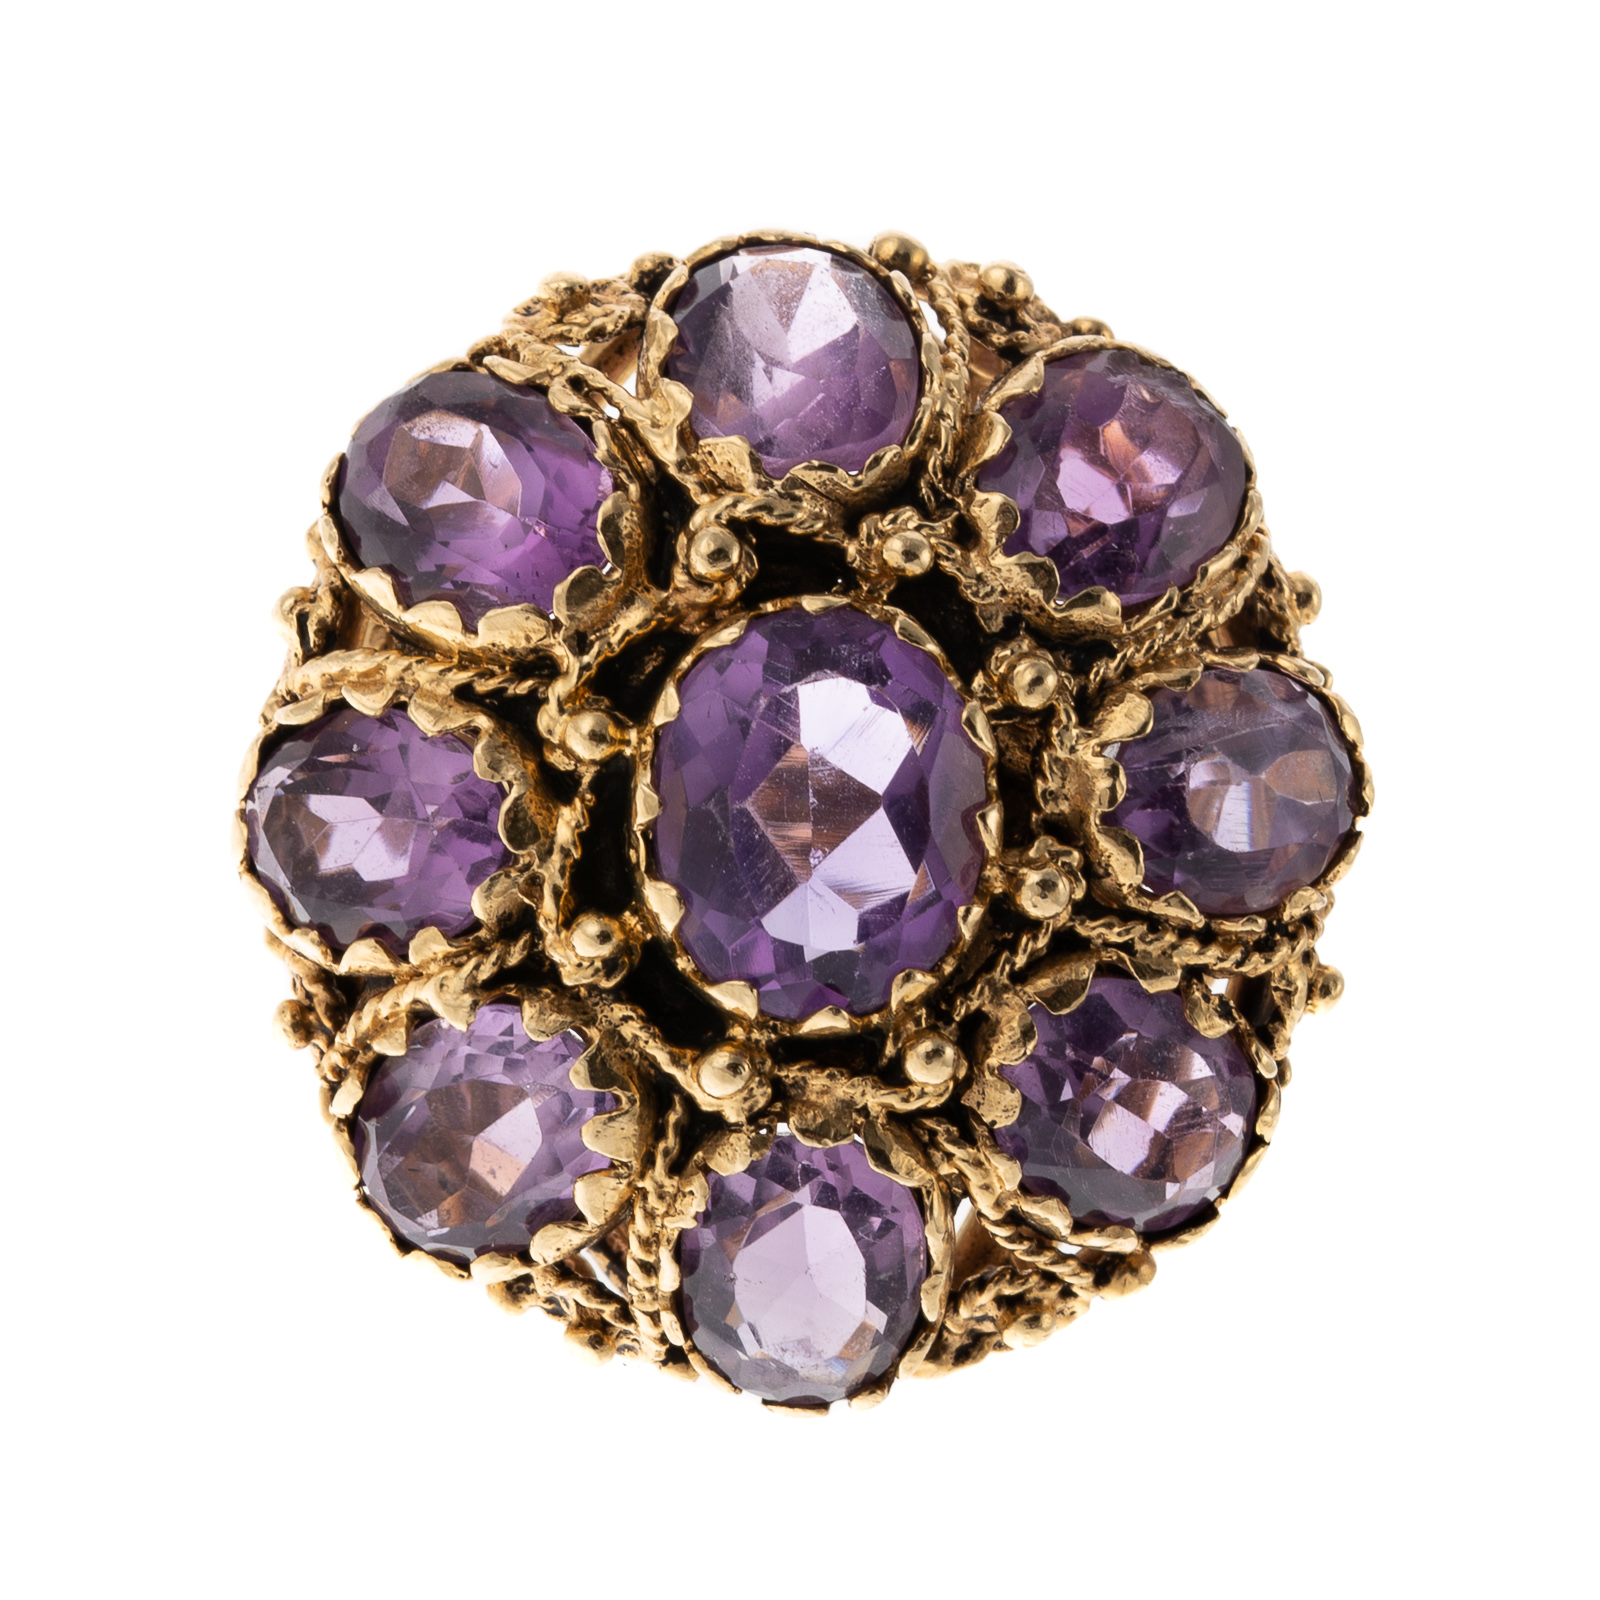 AN AMETHYST CLUSTER RING IN 14K